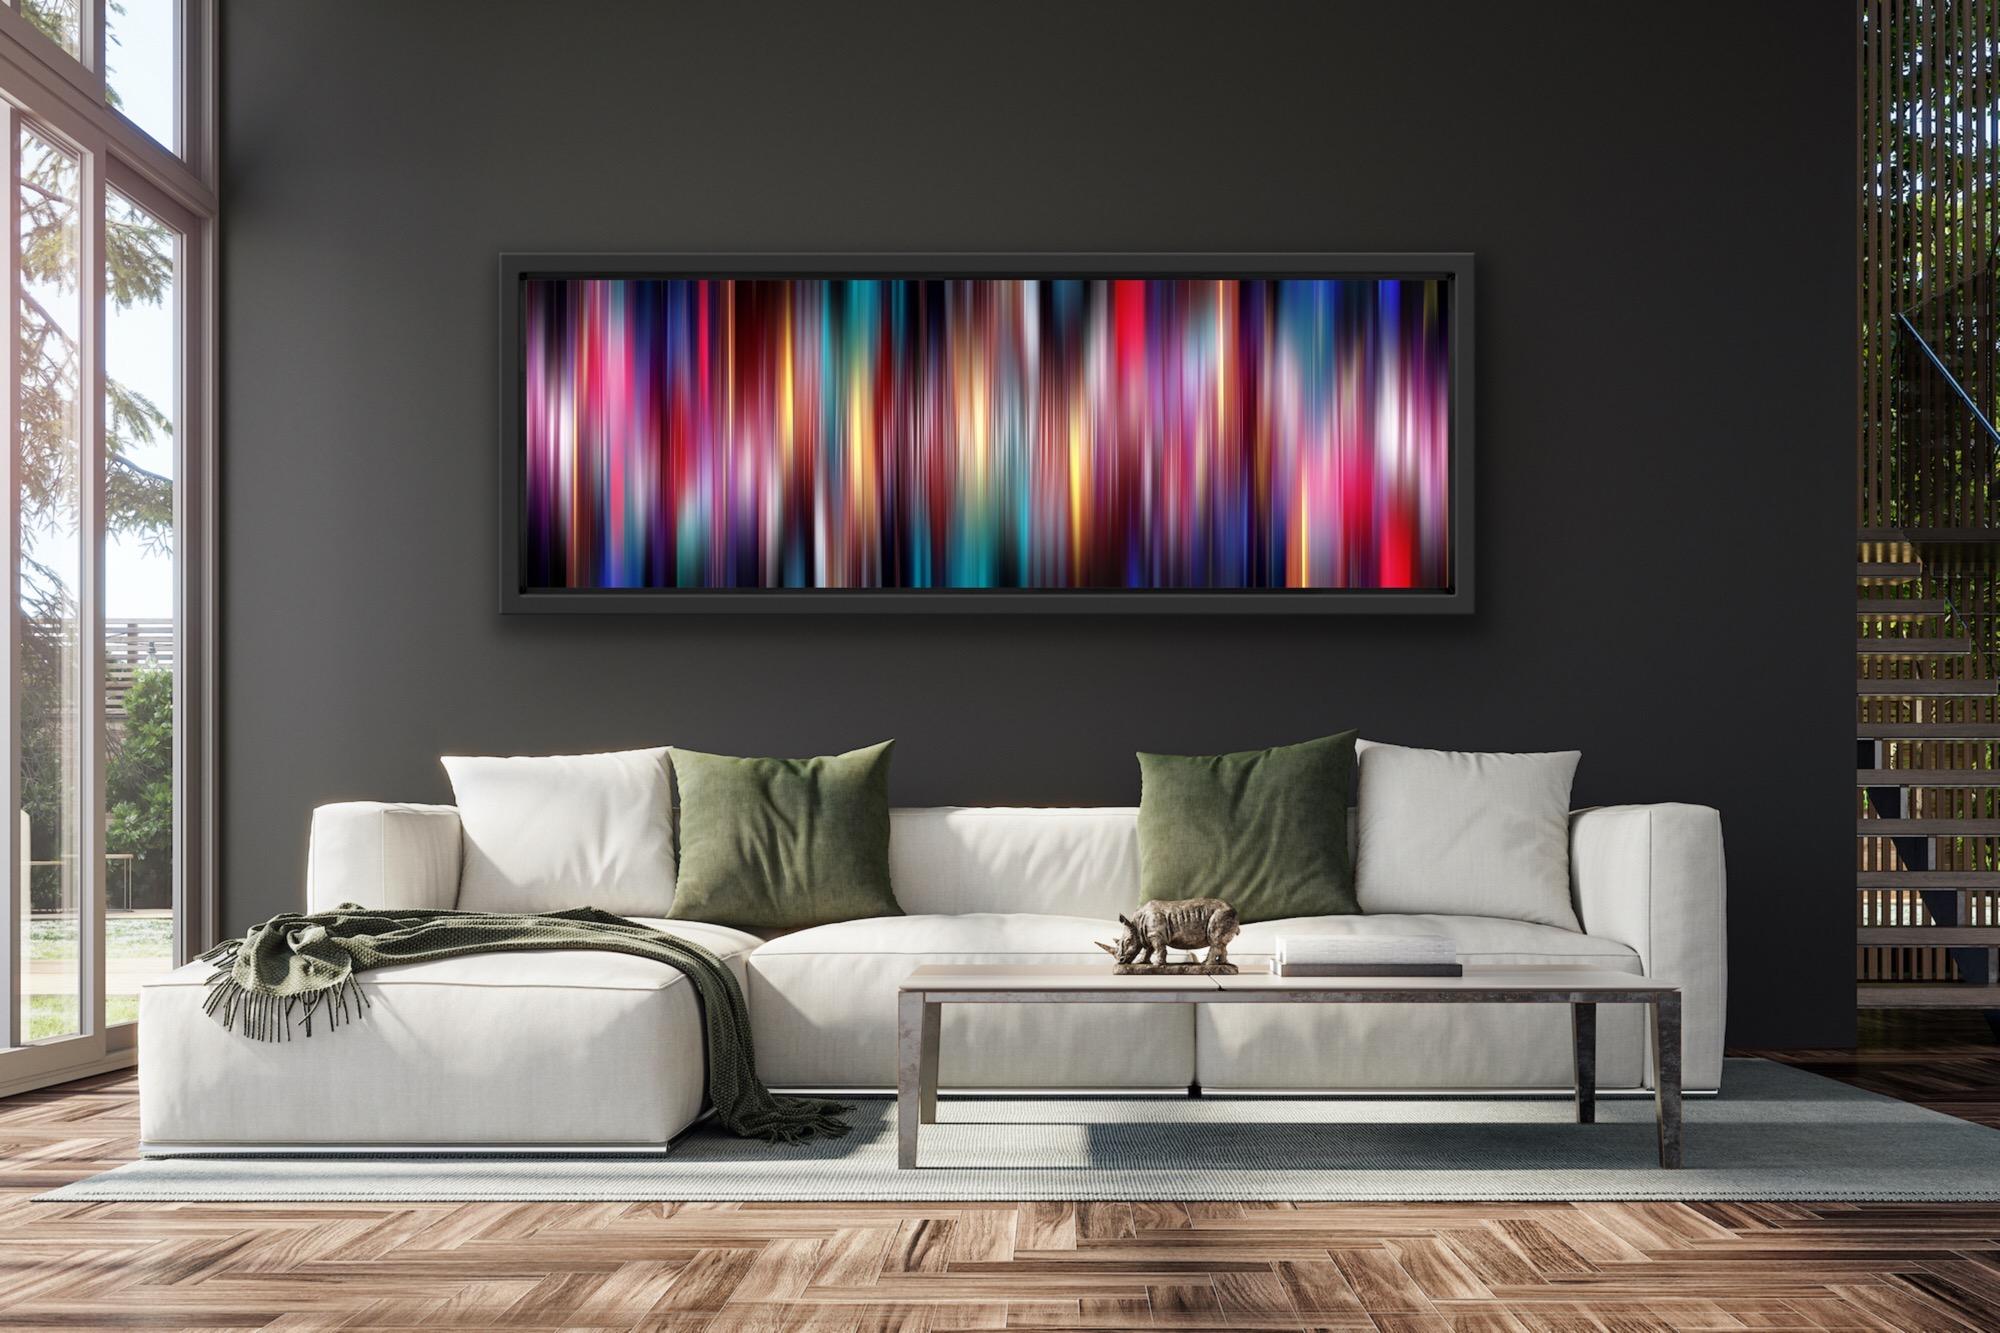 Killer Kisses, Colourful Abstract Art, Contemporary Abstract Statement Art - Print by Allan Forsyth